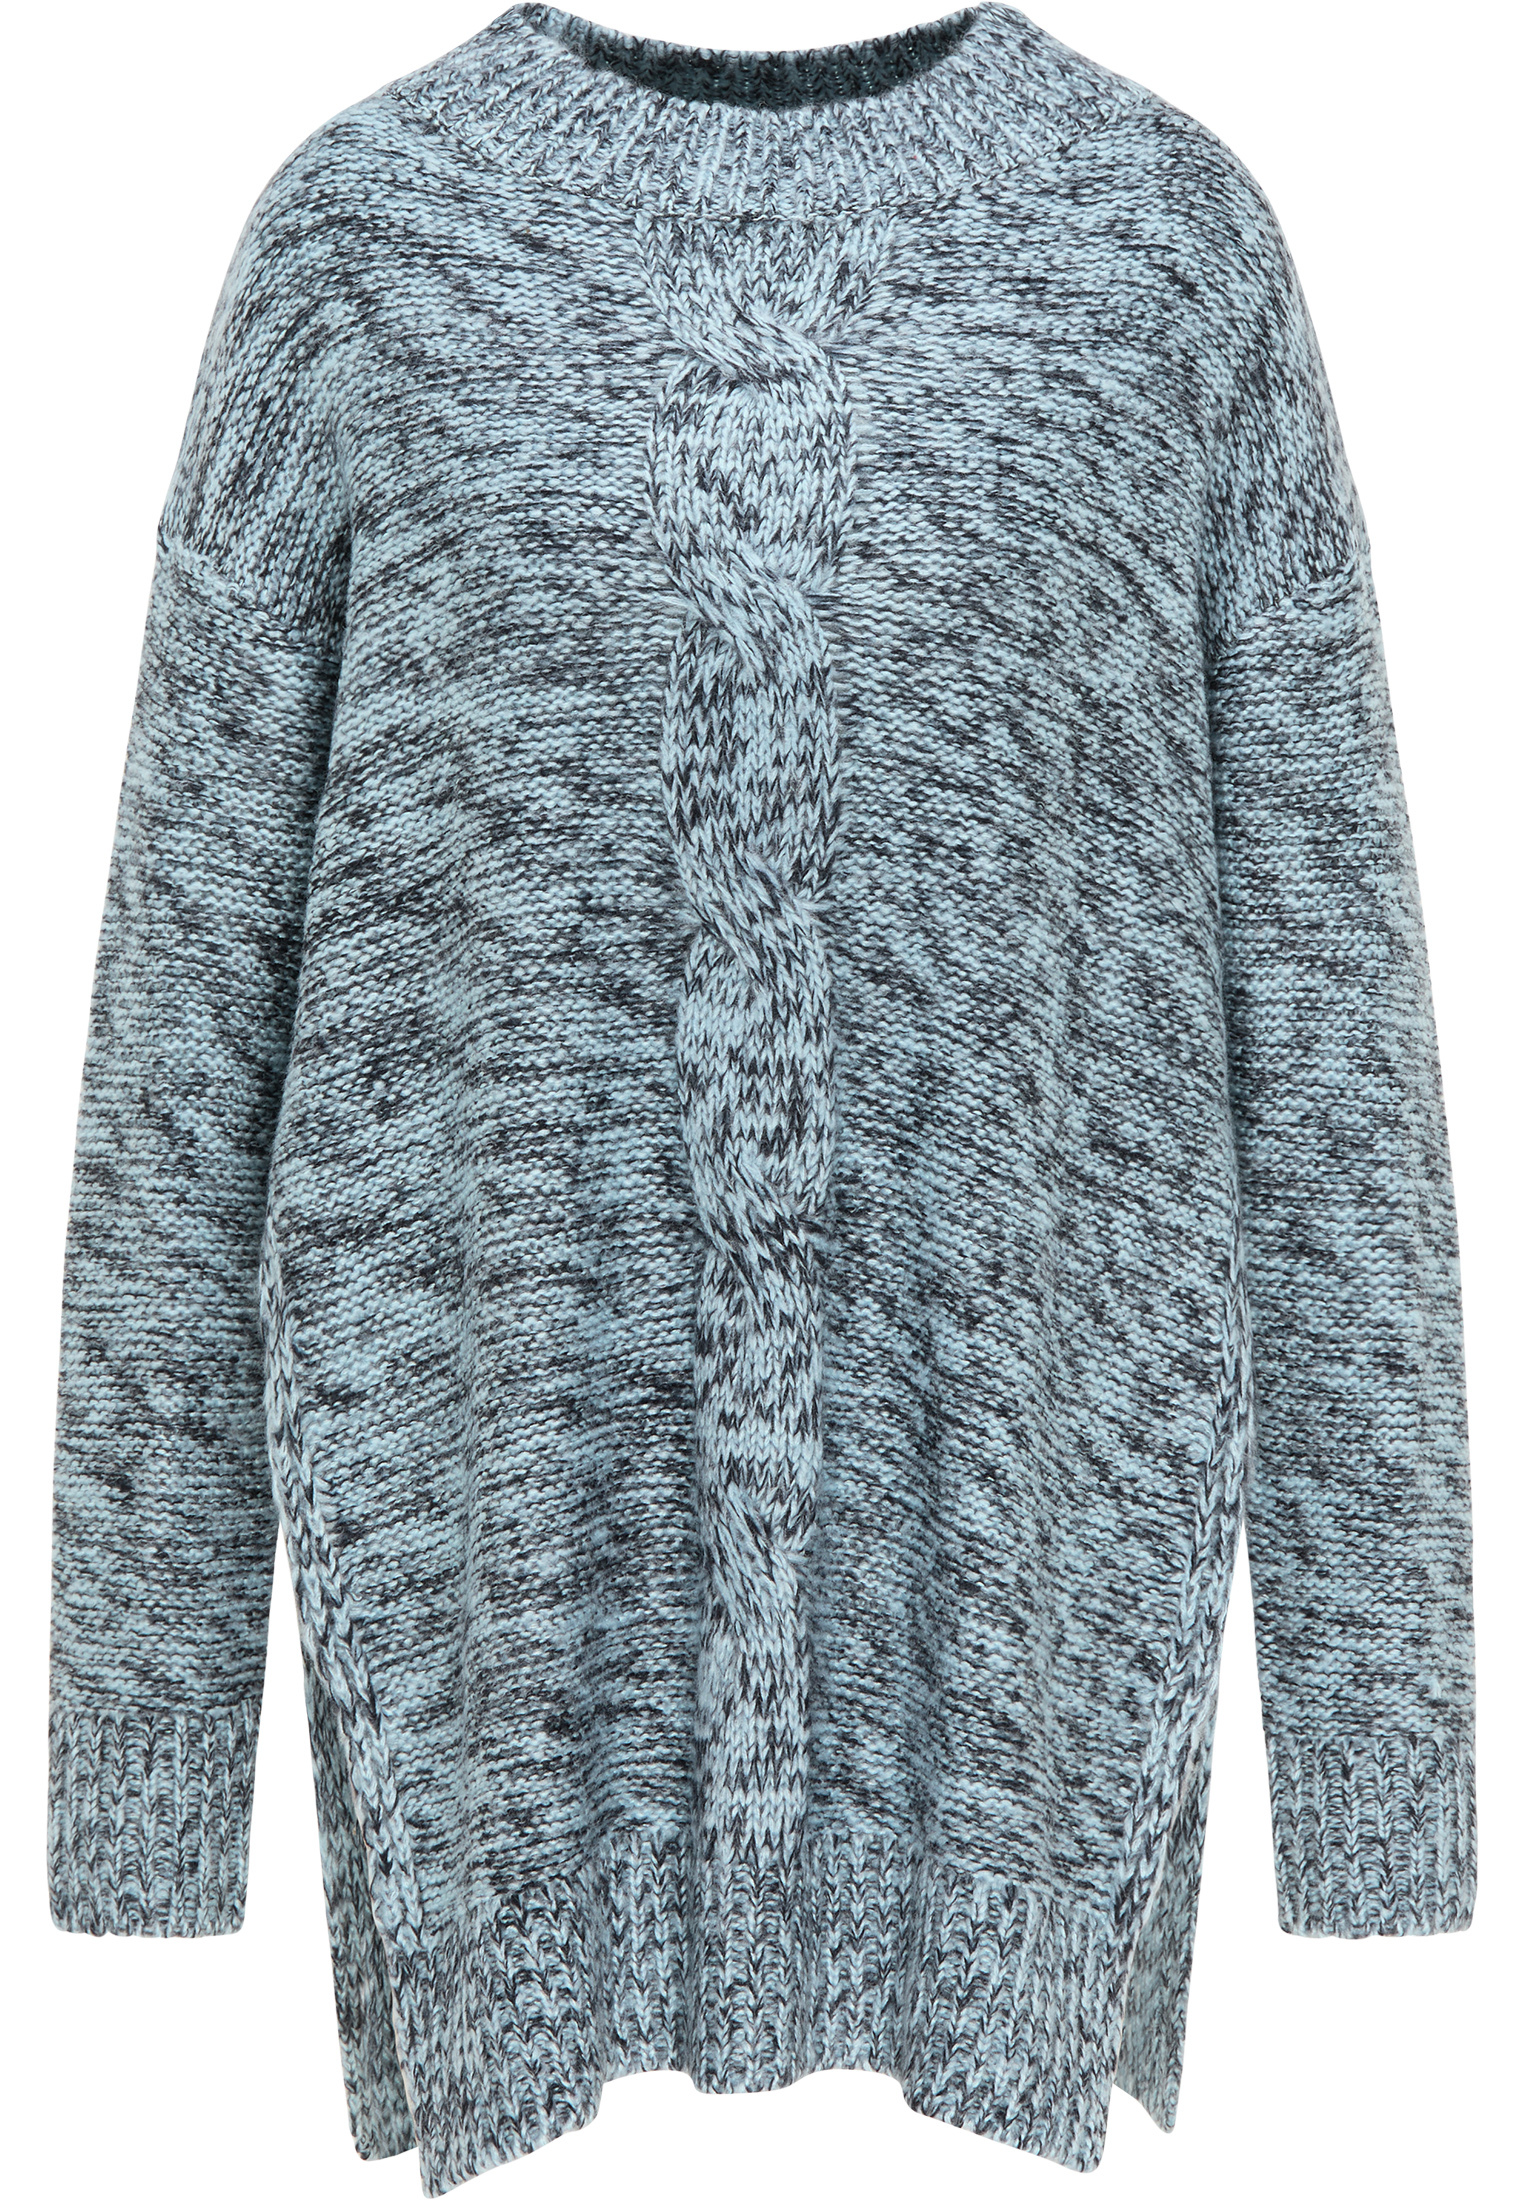 Pullover e cardigan Donna MYMO Pullover extra large in Blu Notte, Opale 